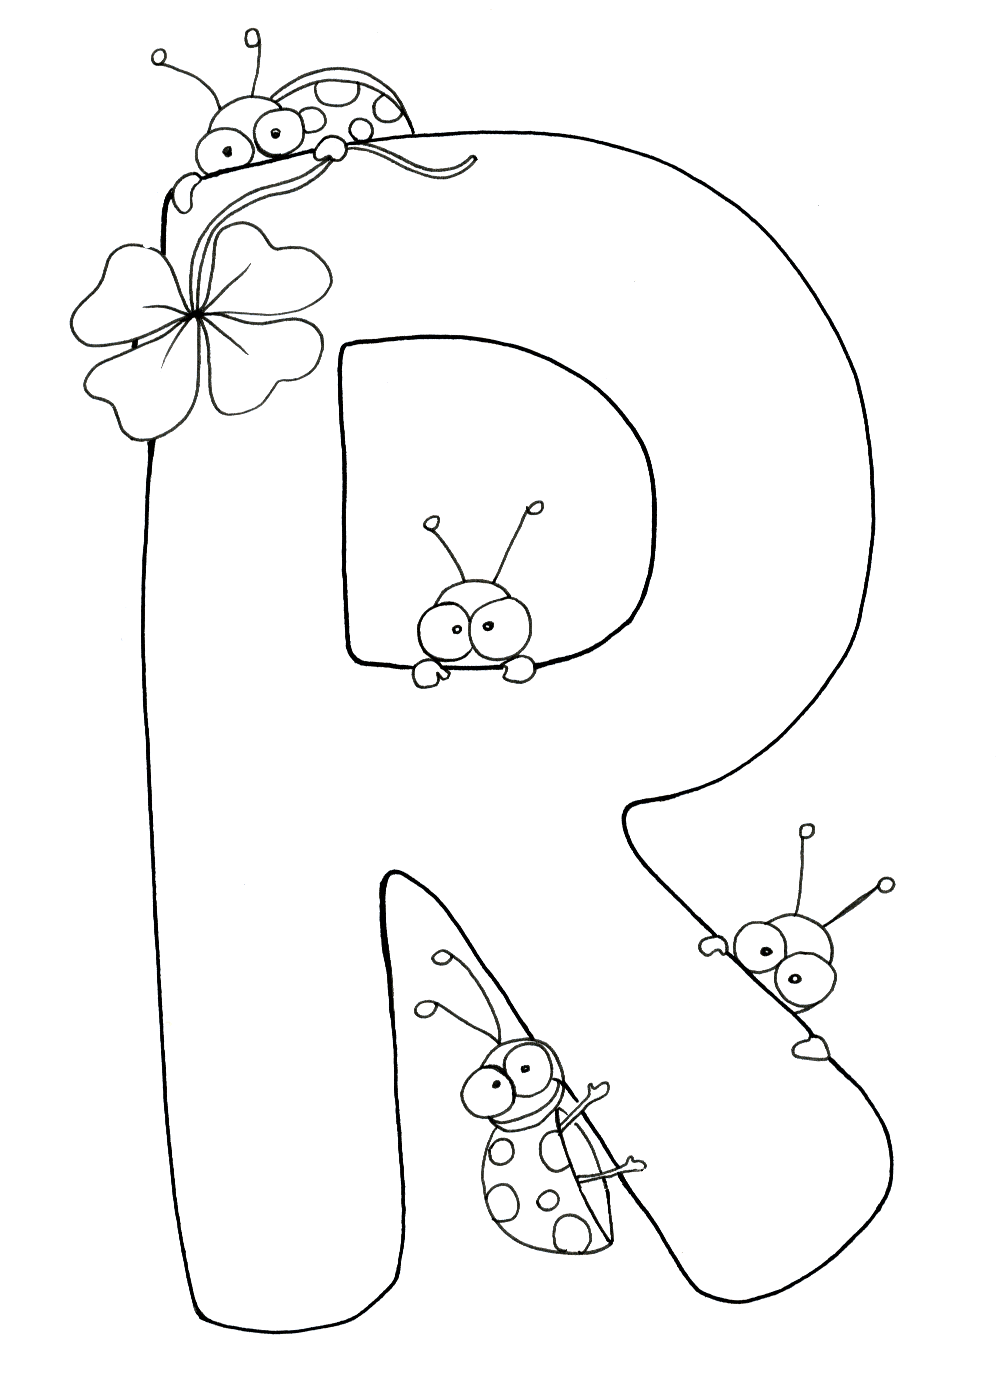 r coloring pages - photo #50